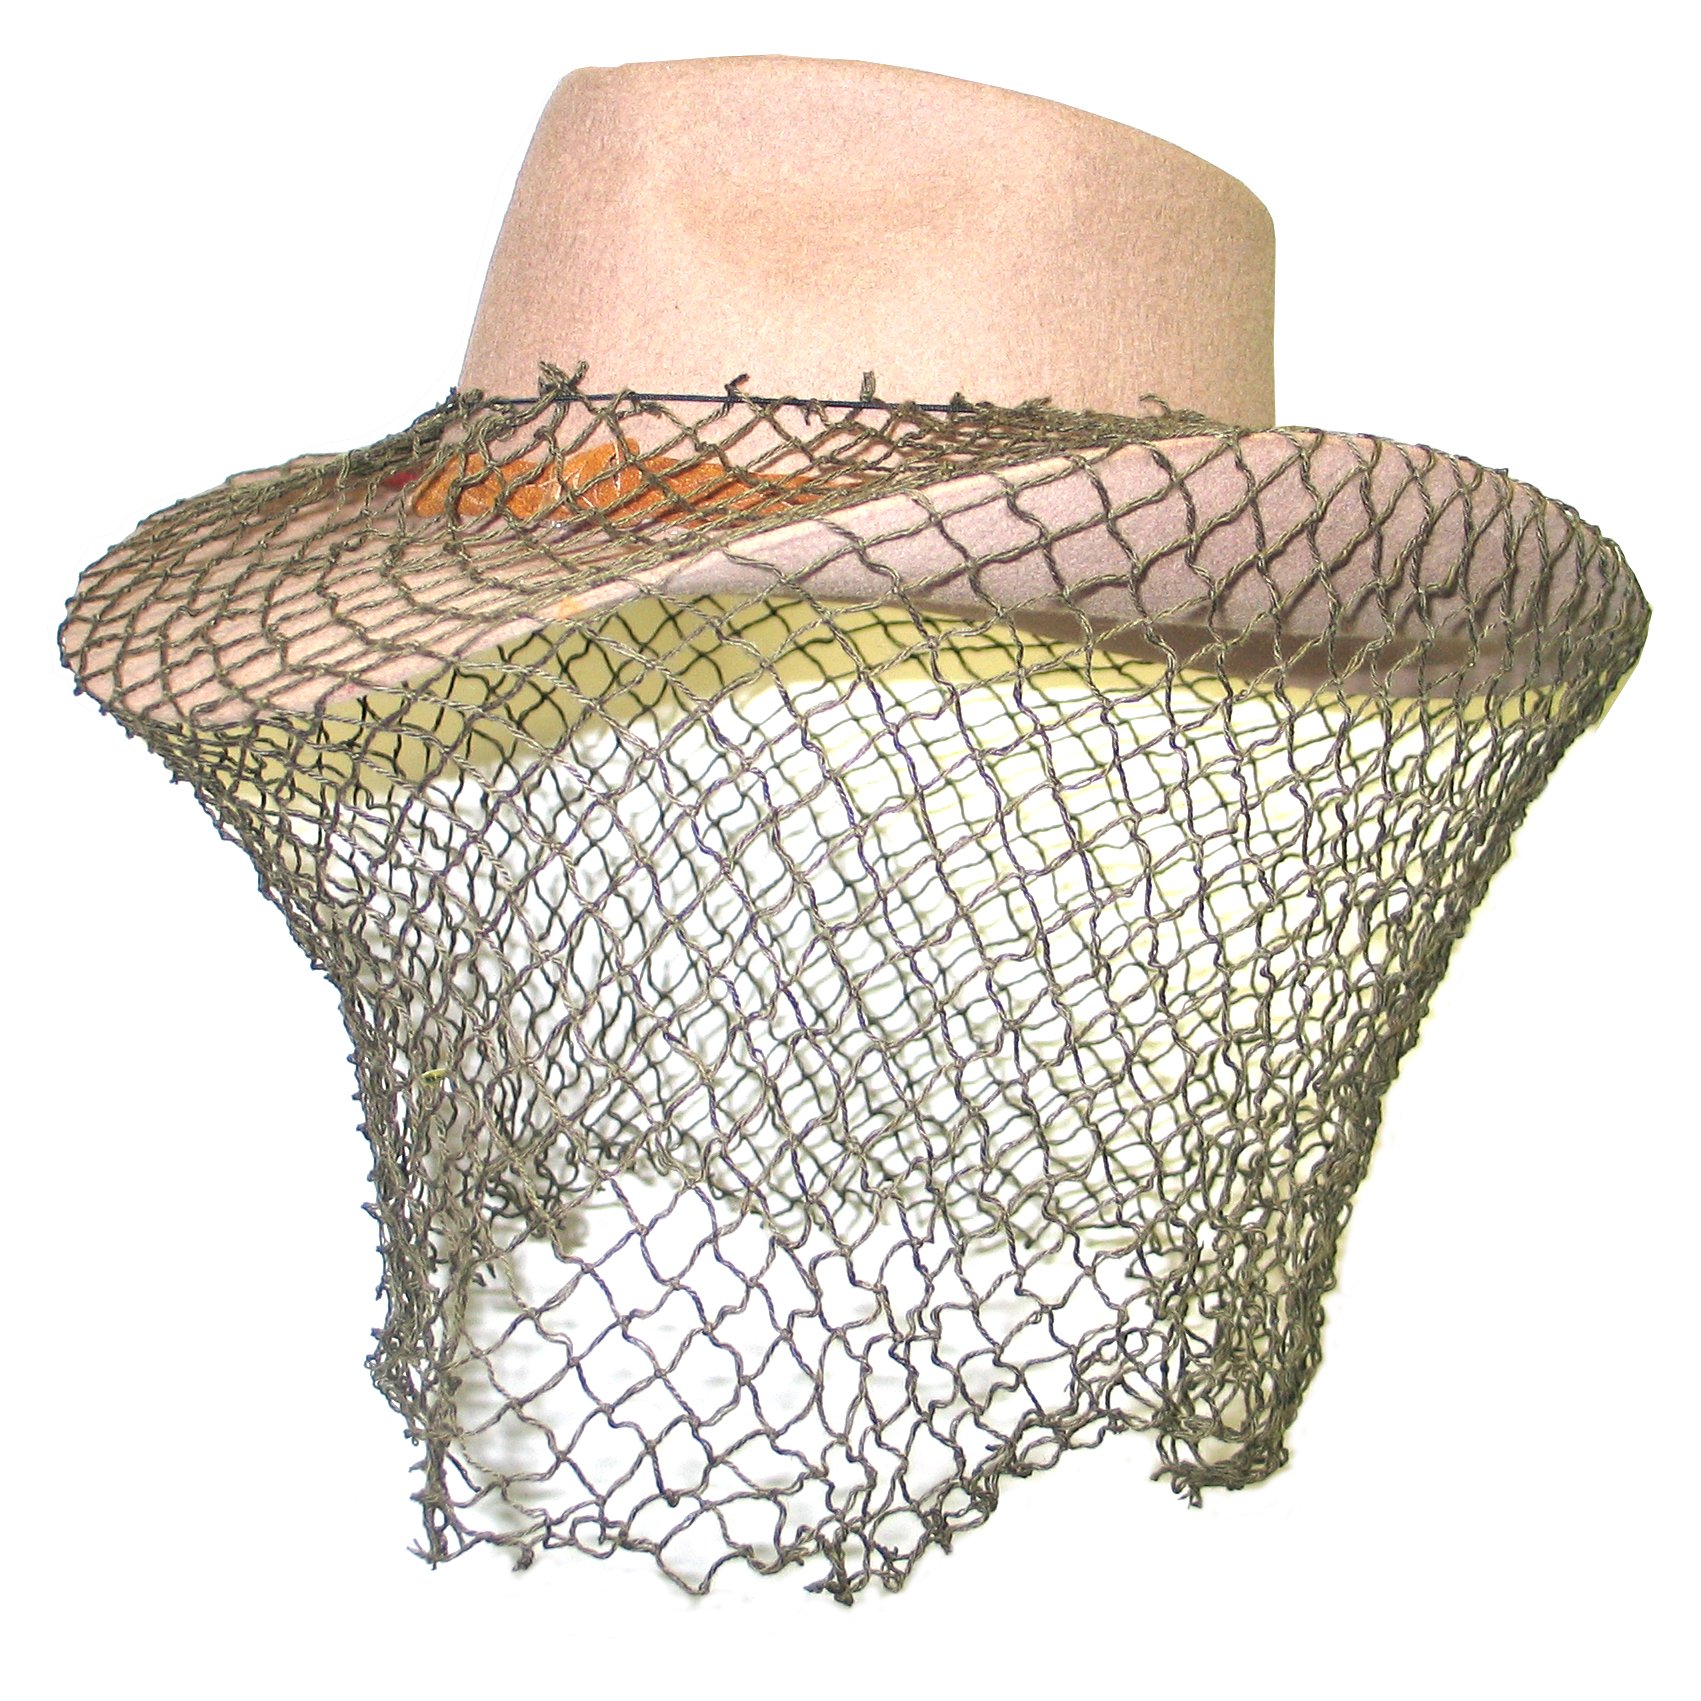 Open Weave Fly Net - OUTBOUND NEW : Mosquito Nets and Insect Repellents to  Keep Annoying Bugs at Bay